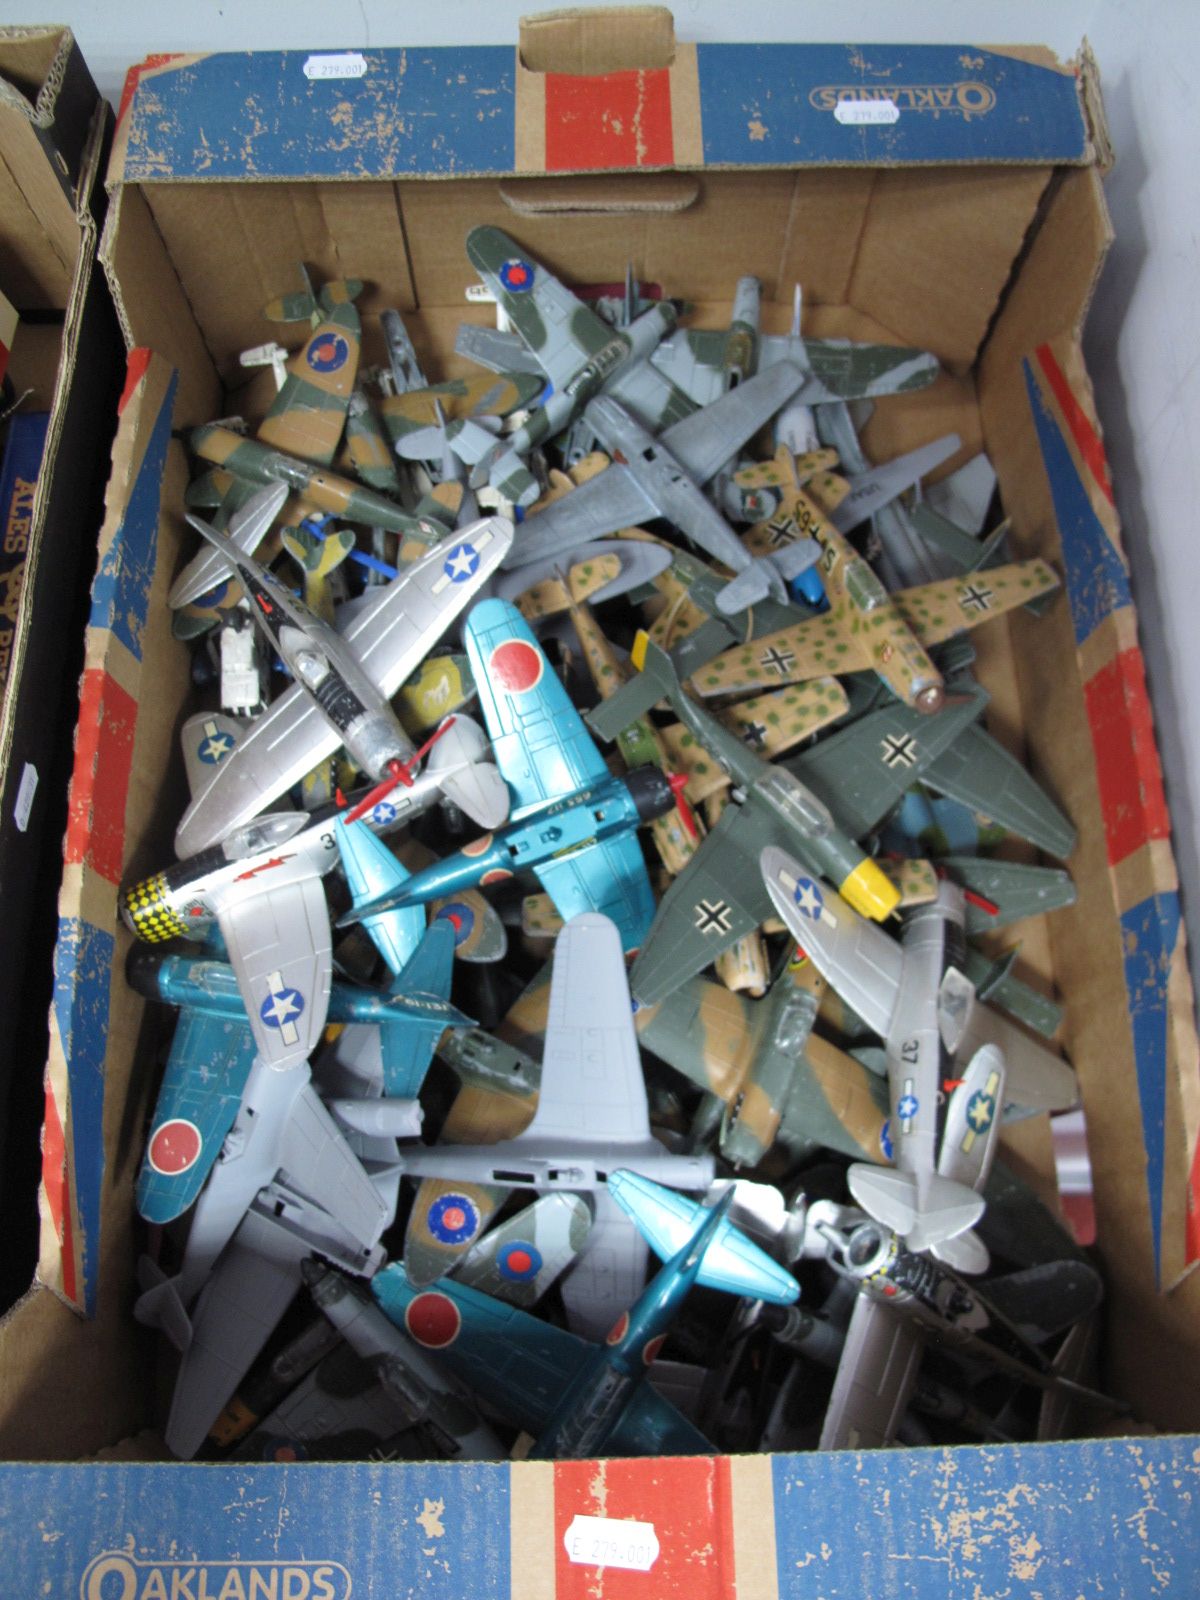 Over Fifty 1970's Dinky Aircraft, including P47 Thunderbolt, Hurricane, Spitfire, Zero 1,